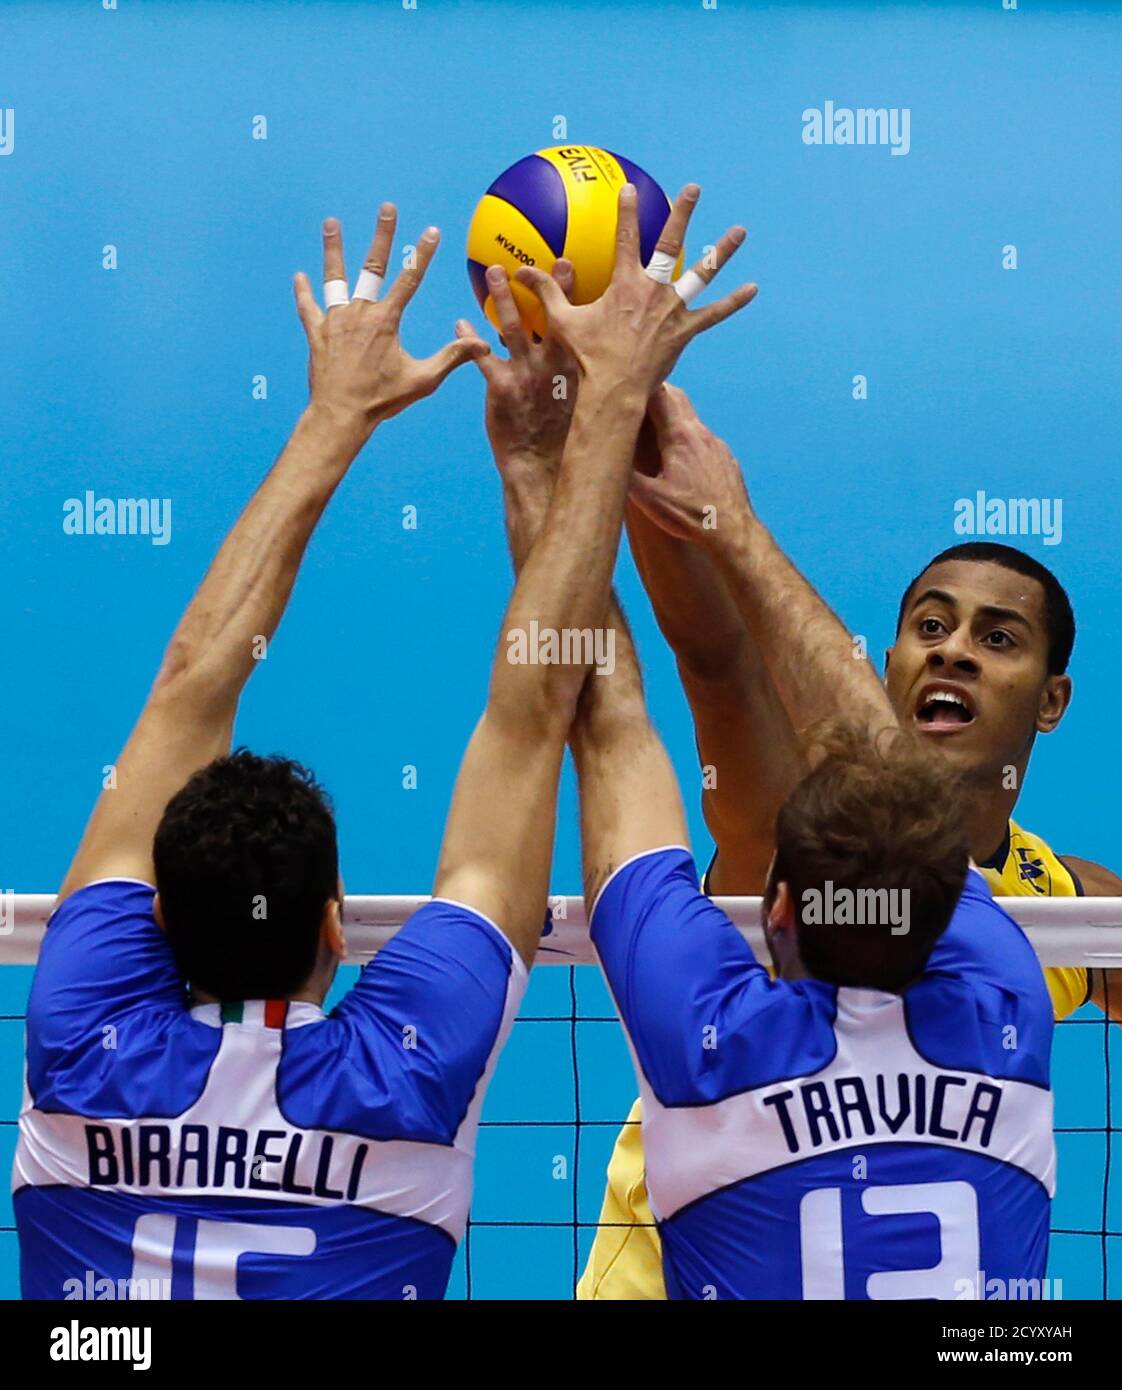 rem samen Prediken Ricardo Lucarelli Santos De Souza (back R) of Brazil pushes the ball  against Emanuele Birarelli (L) and Dragan Travica of Italy during their  FIVB Men's Volleyball World Grand Champions Cup 2013 in